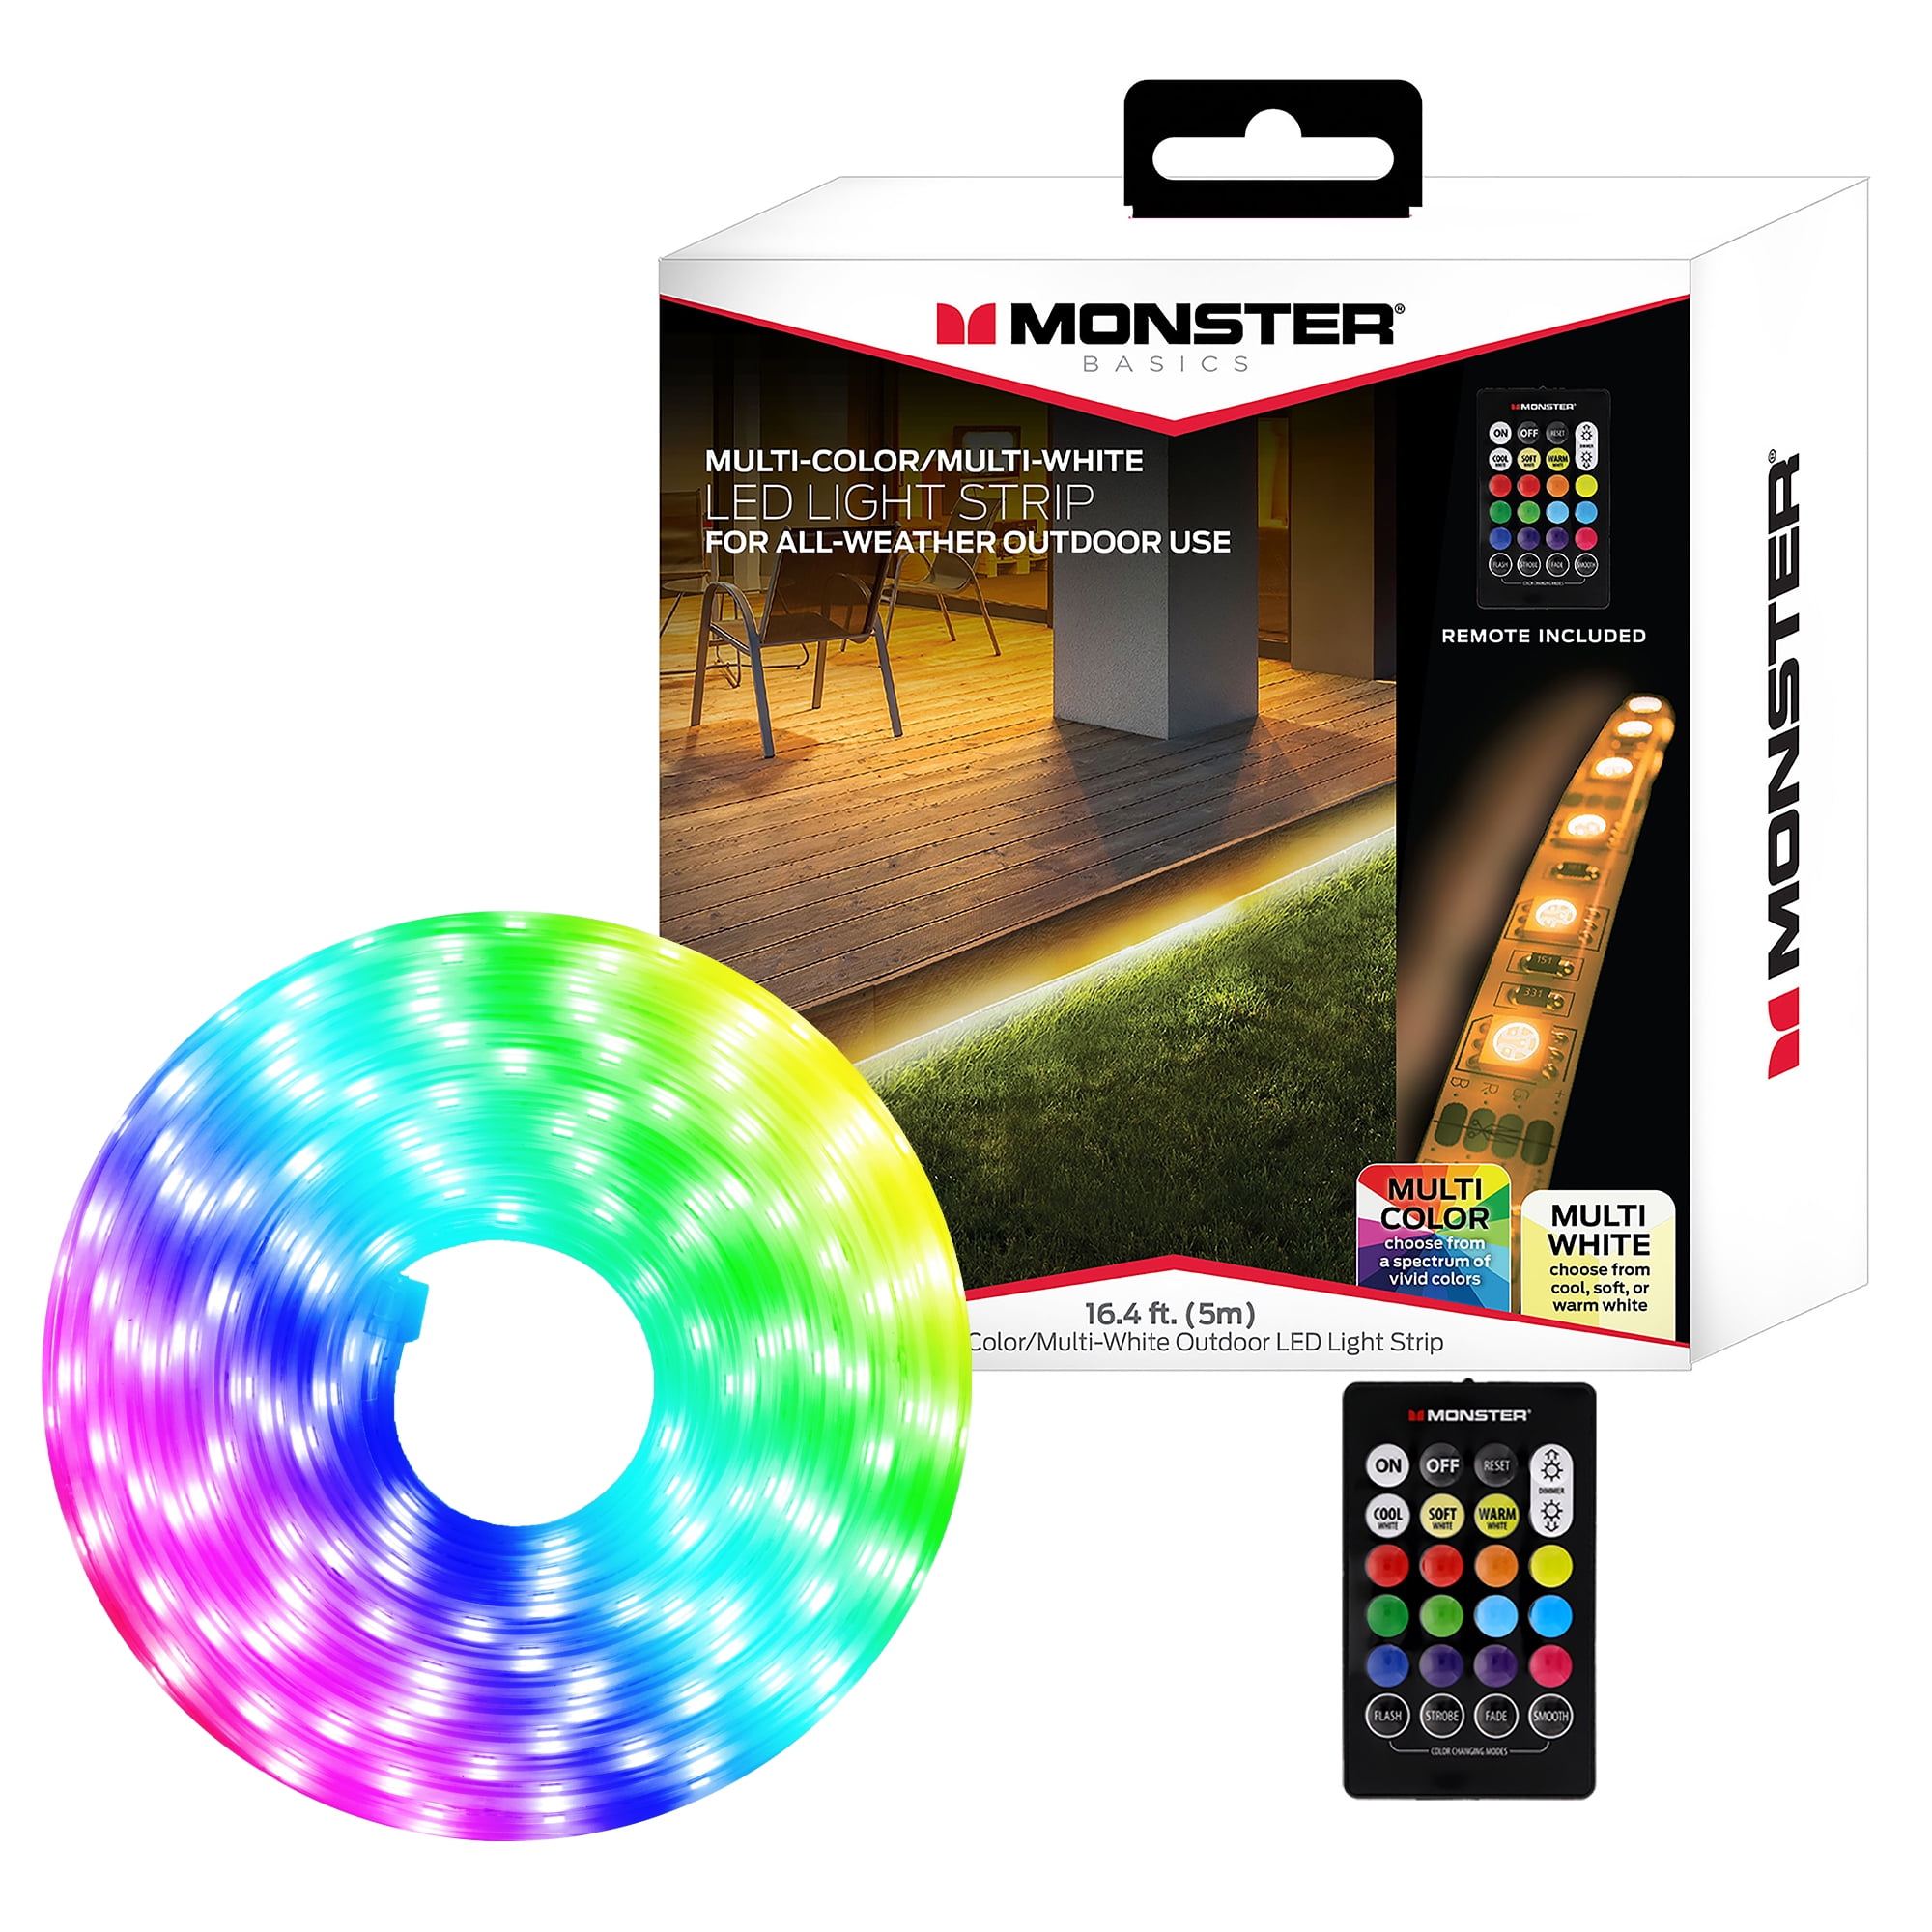 Monster LED 16.4ft Multi-Color Multi-White Outdoor / Indoor RGB LED Light Strip with Remote